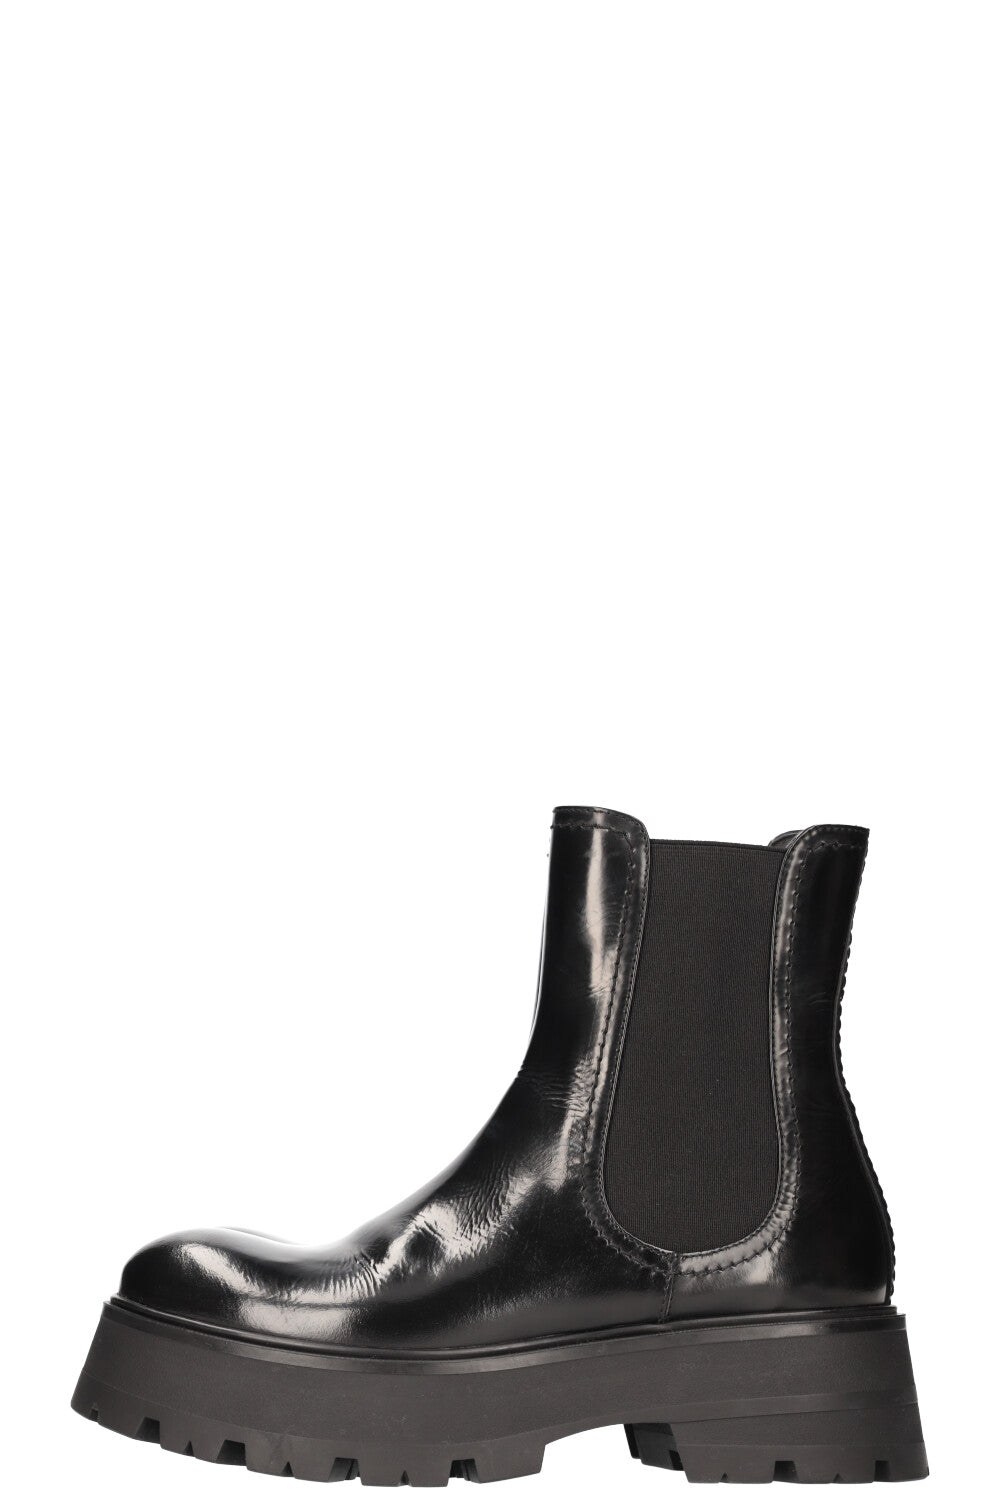 ALEXANDER MCQUEEN Chunky Chelsea Boots Patent Black